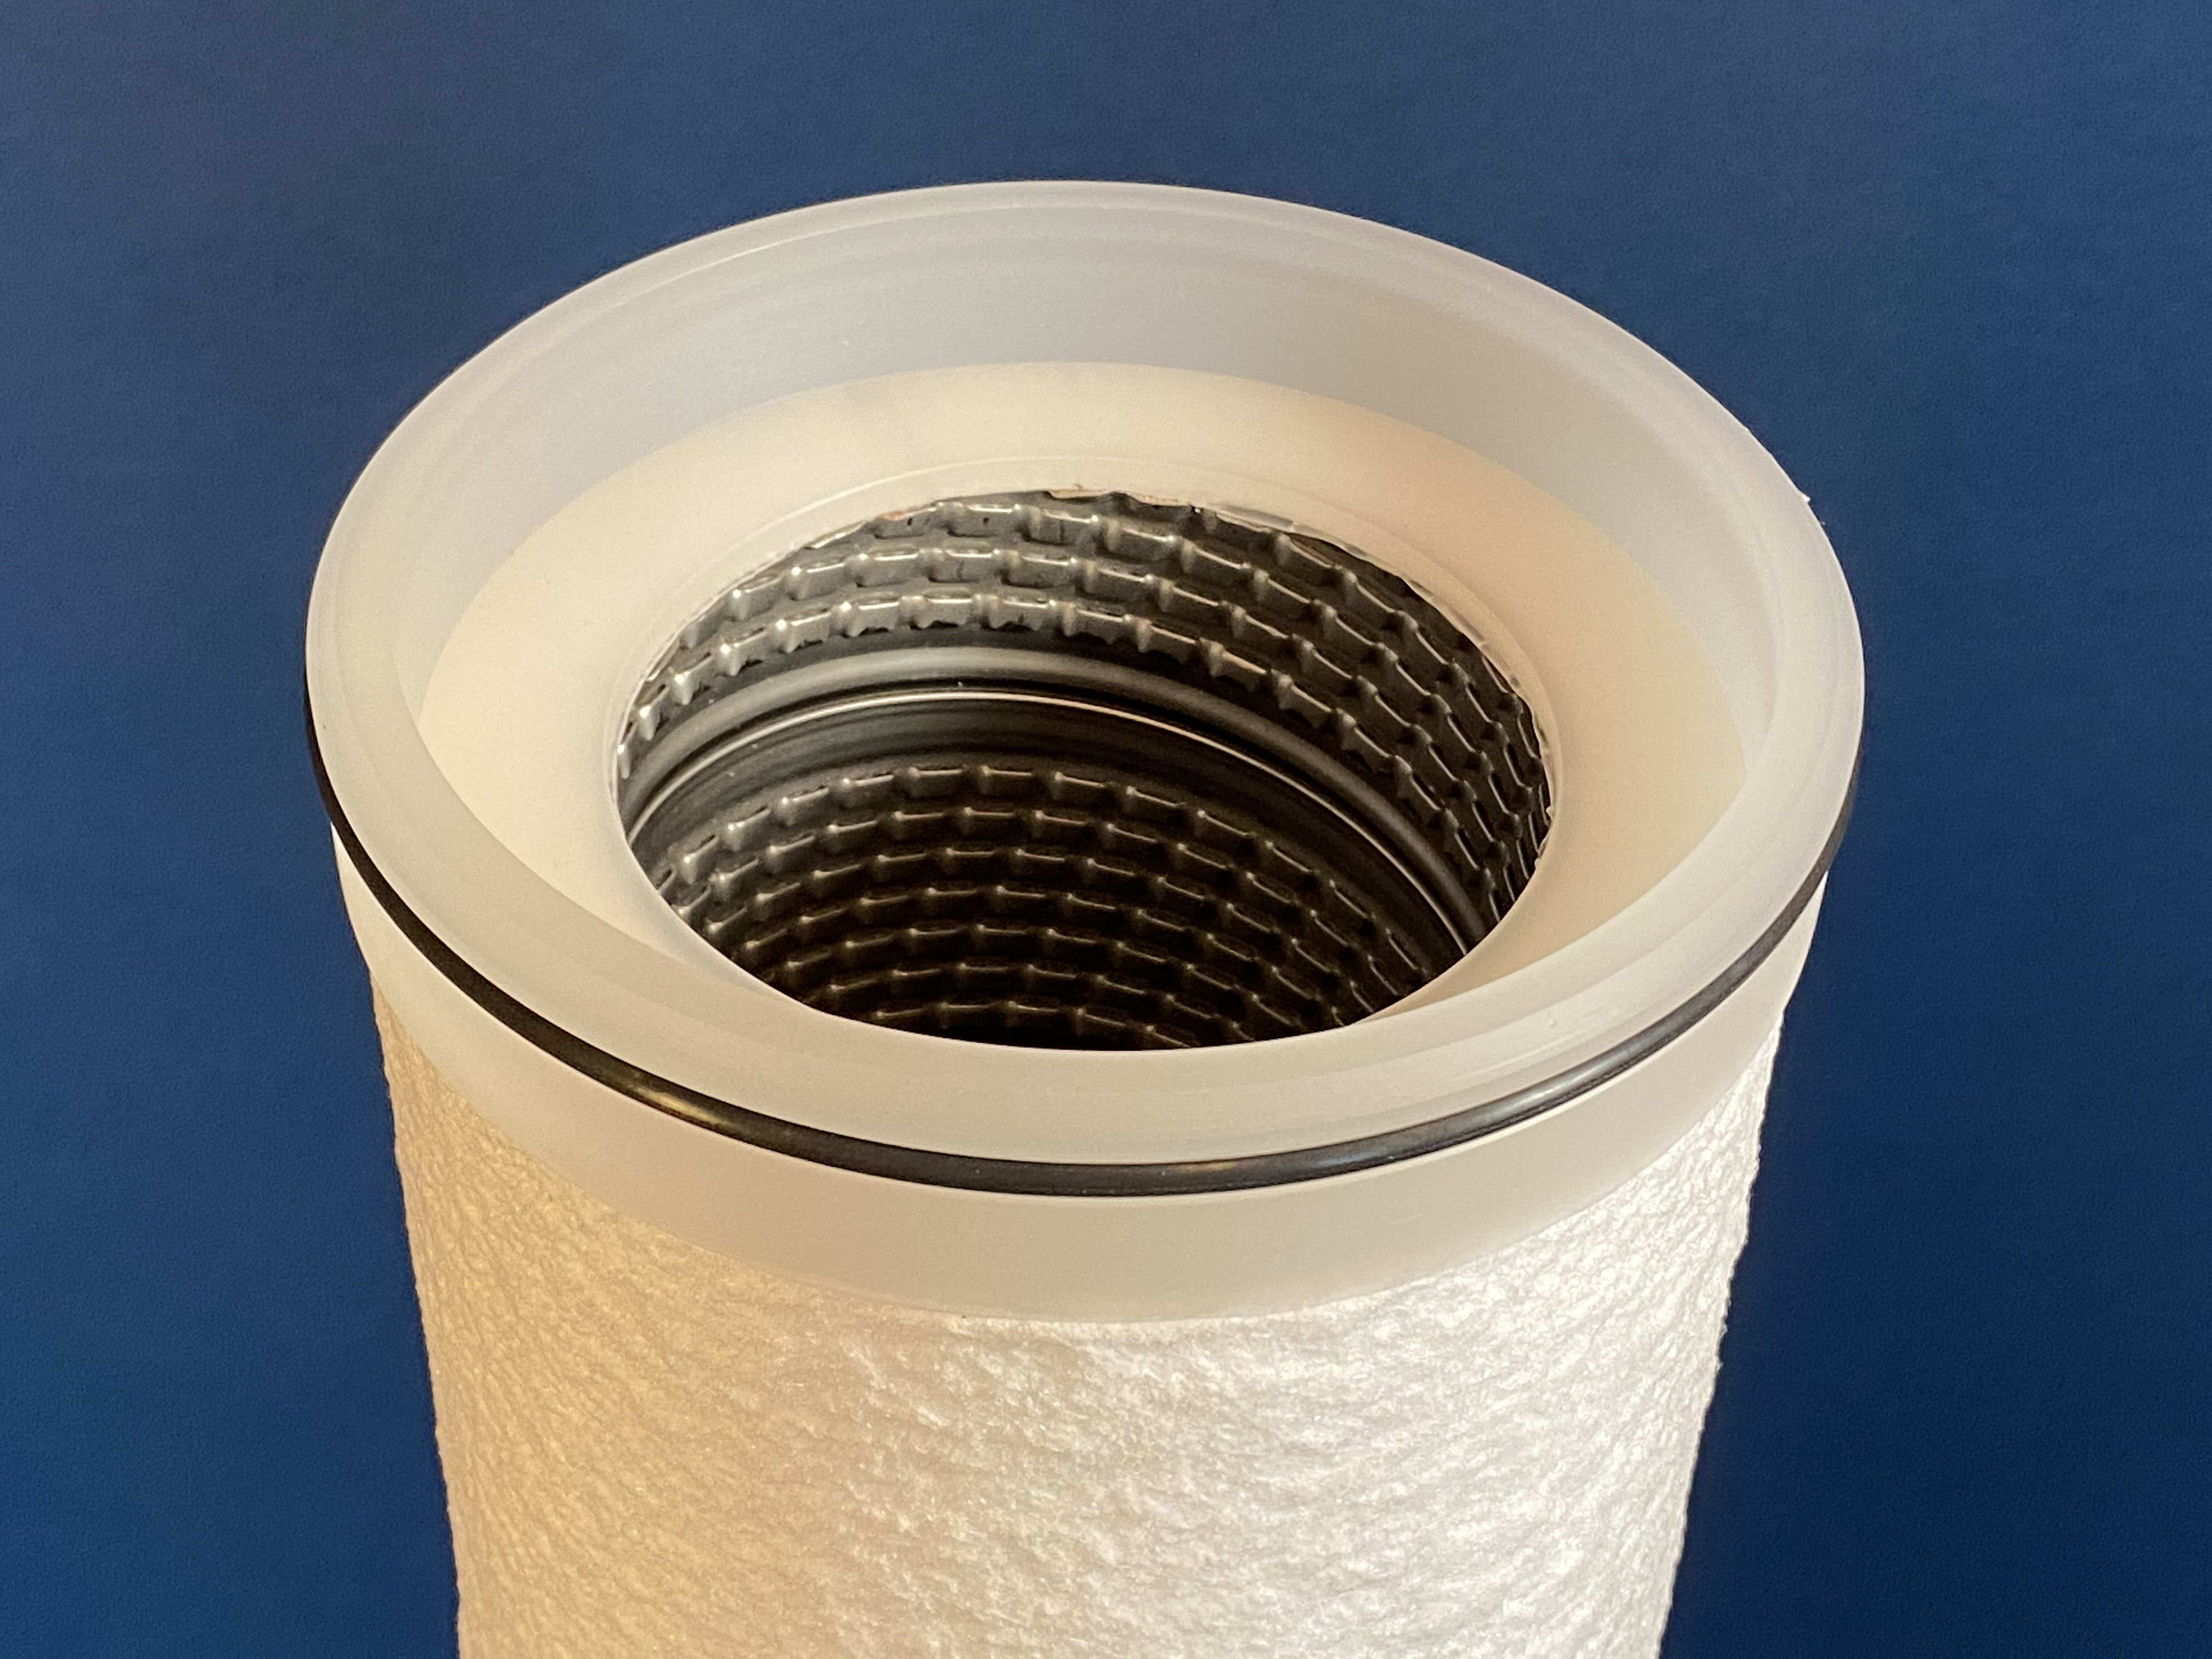 SupaSep LGP is designed to provide exceptional efficiency and drainage performance essential to many high-flow filtration and separation processes.